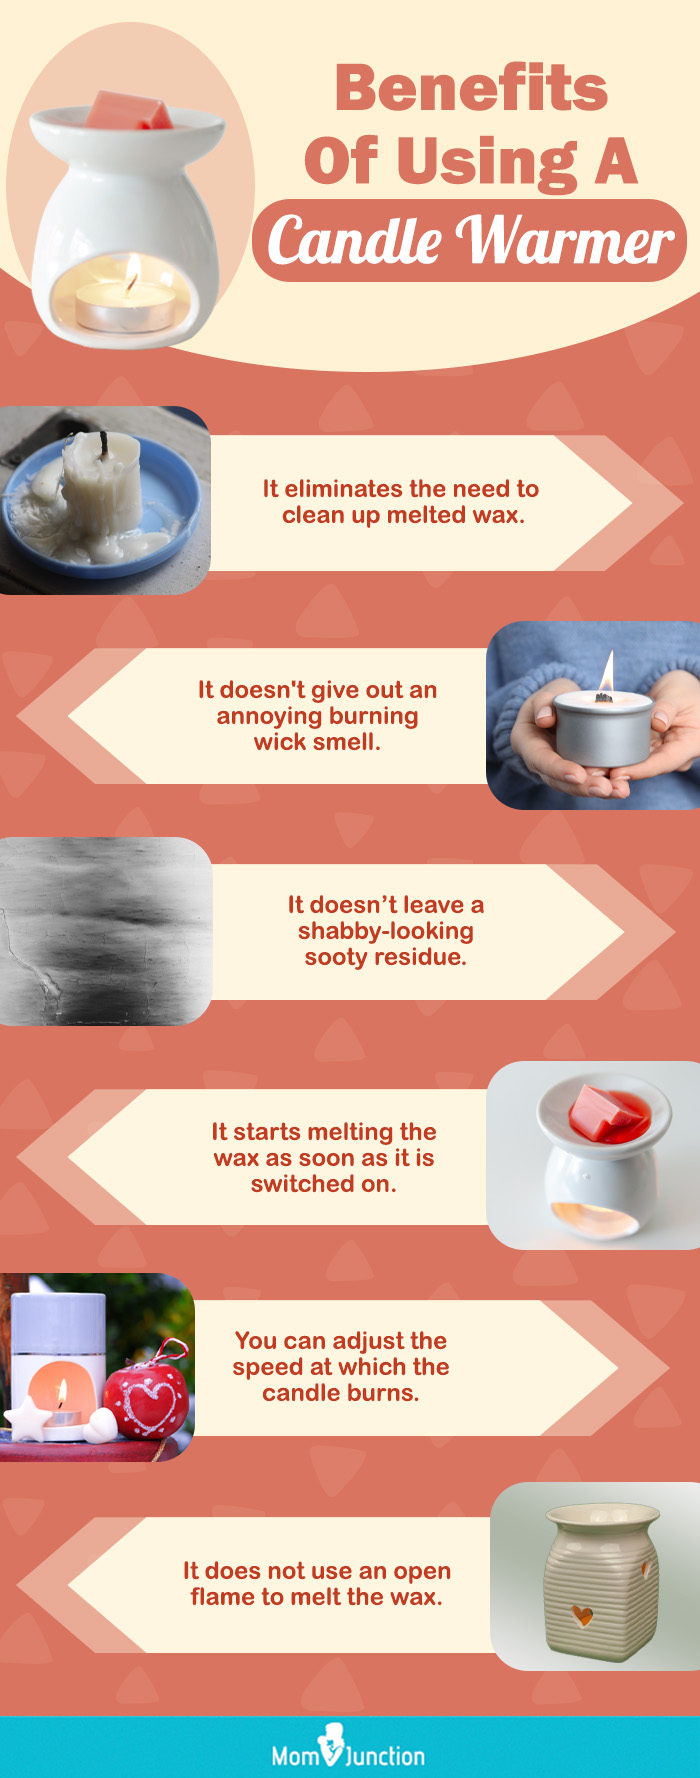 Benefits Of Using A Candle Warmer (infographic)